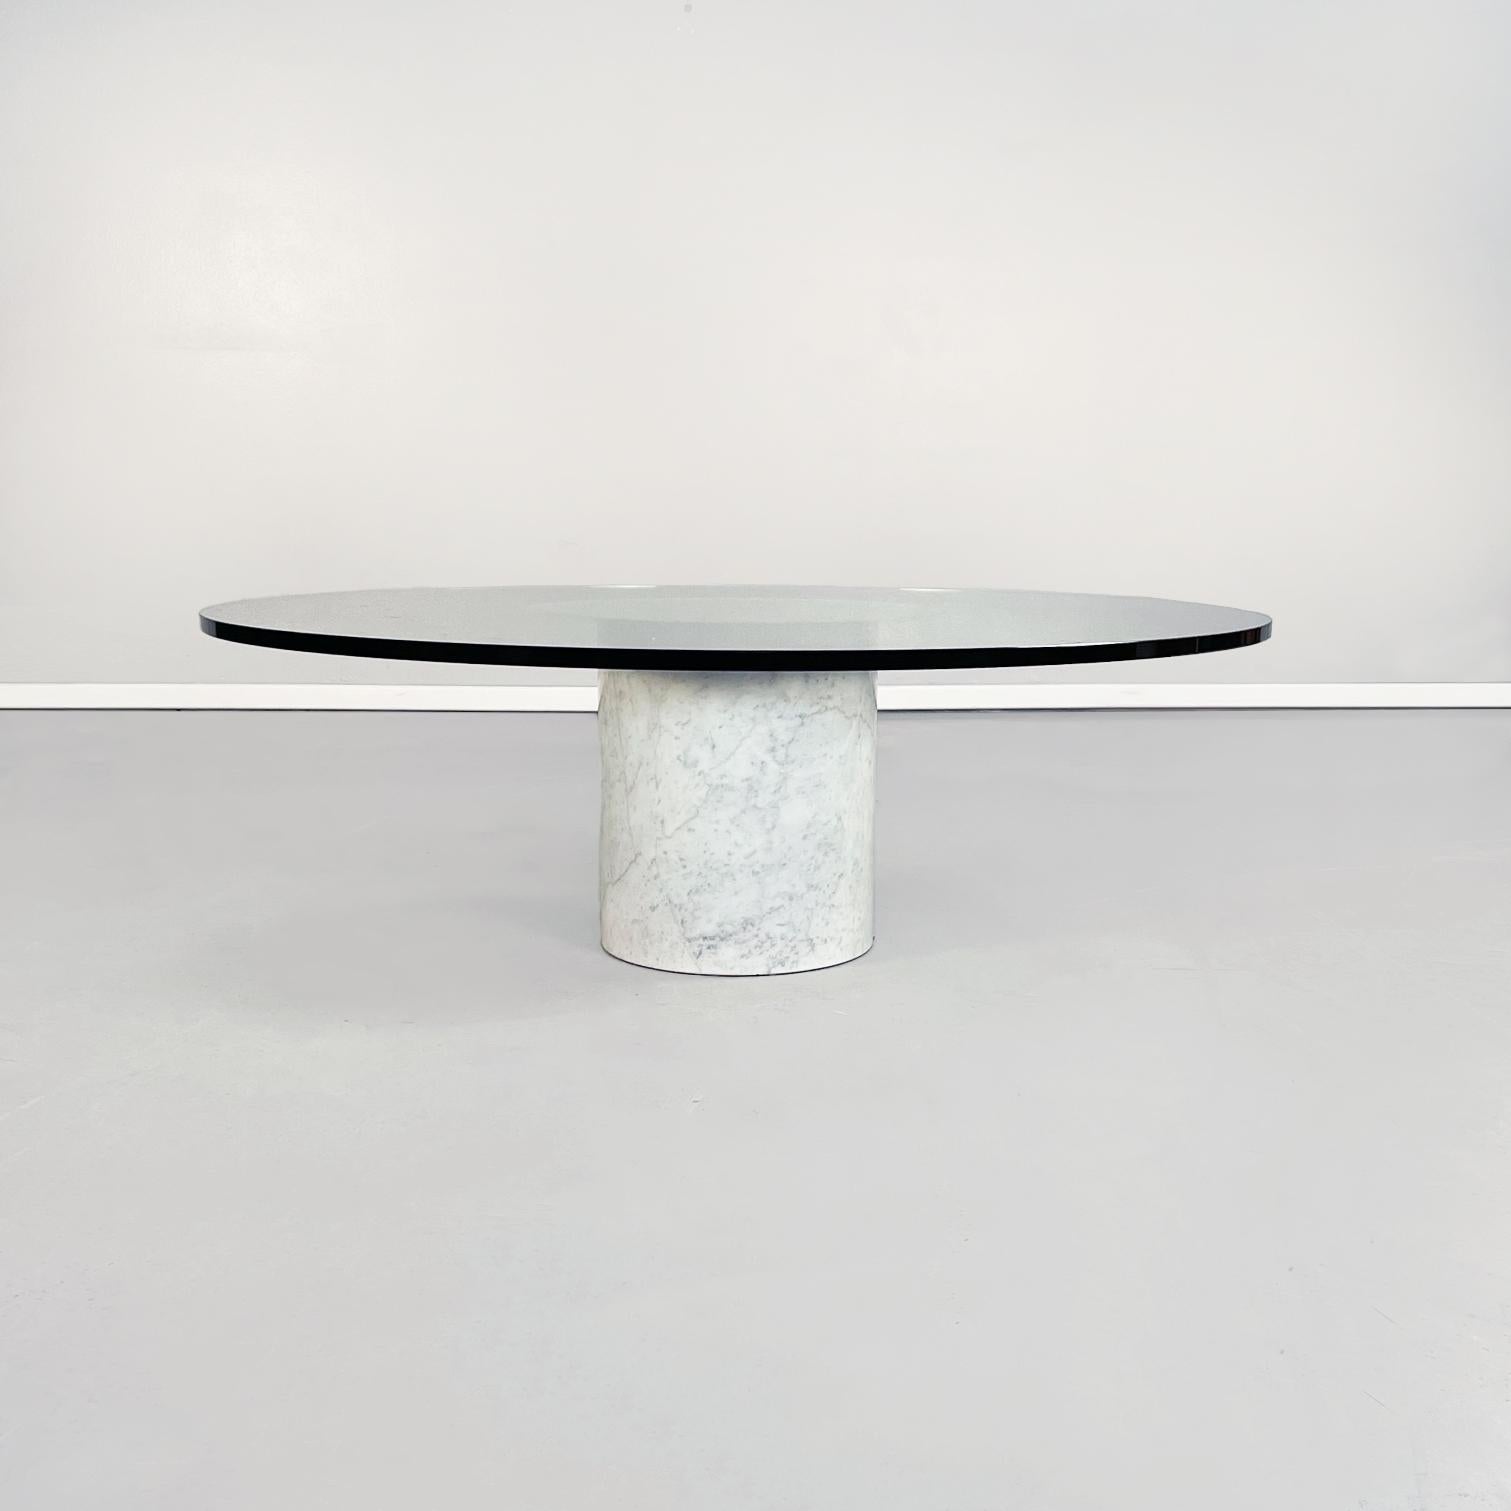 Italian mid-century Round coffee table in aquamarine glass and white marble, 1980s
Round glass coffee table with cylindrical marble base. The round piano in thick aquamarine glass has in the center a round mirror. The cylindrical base is in white